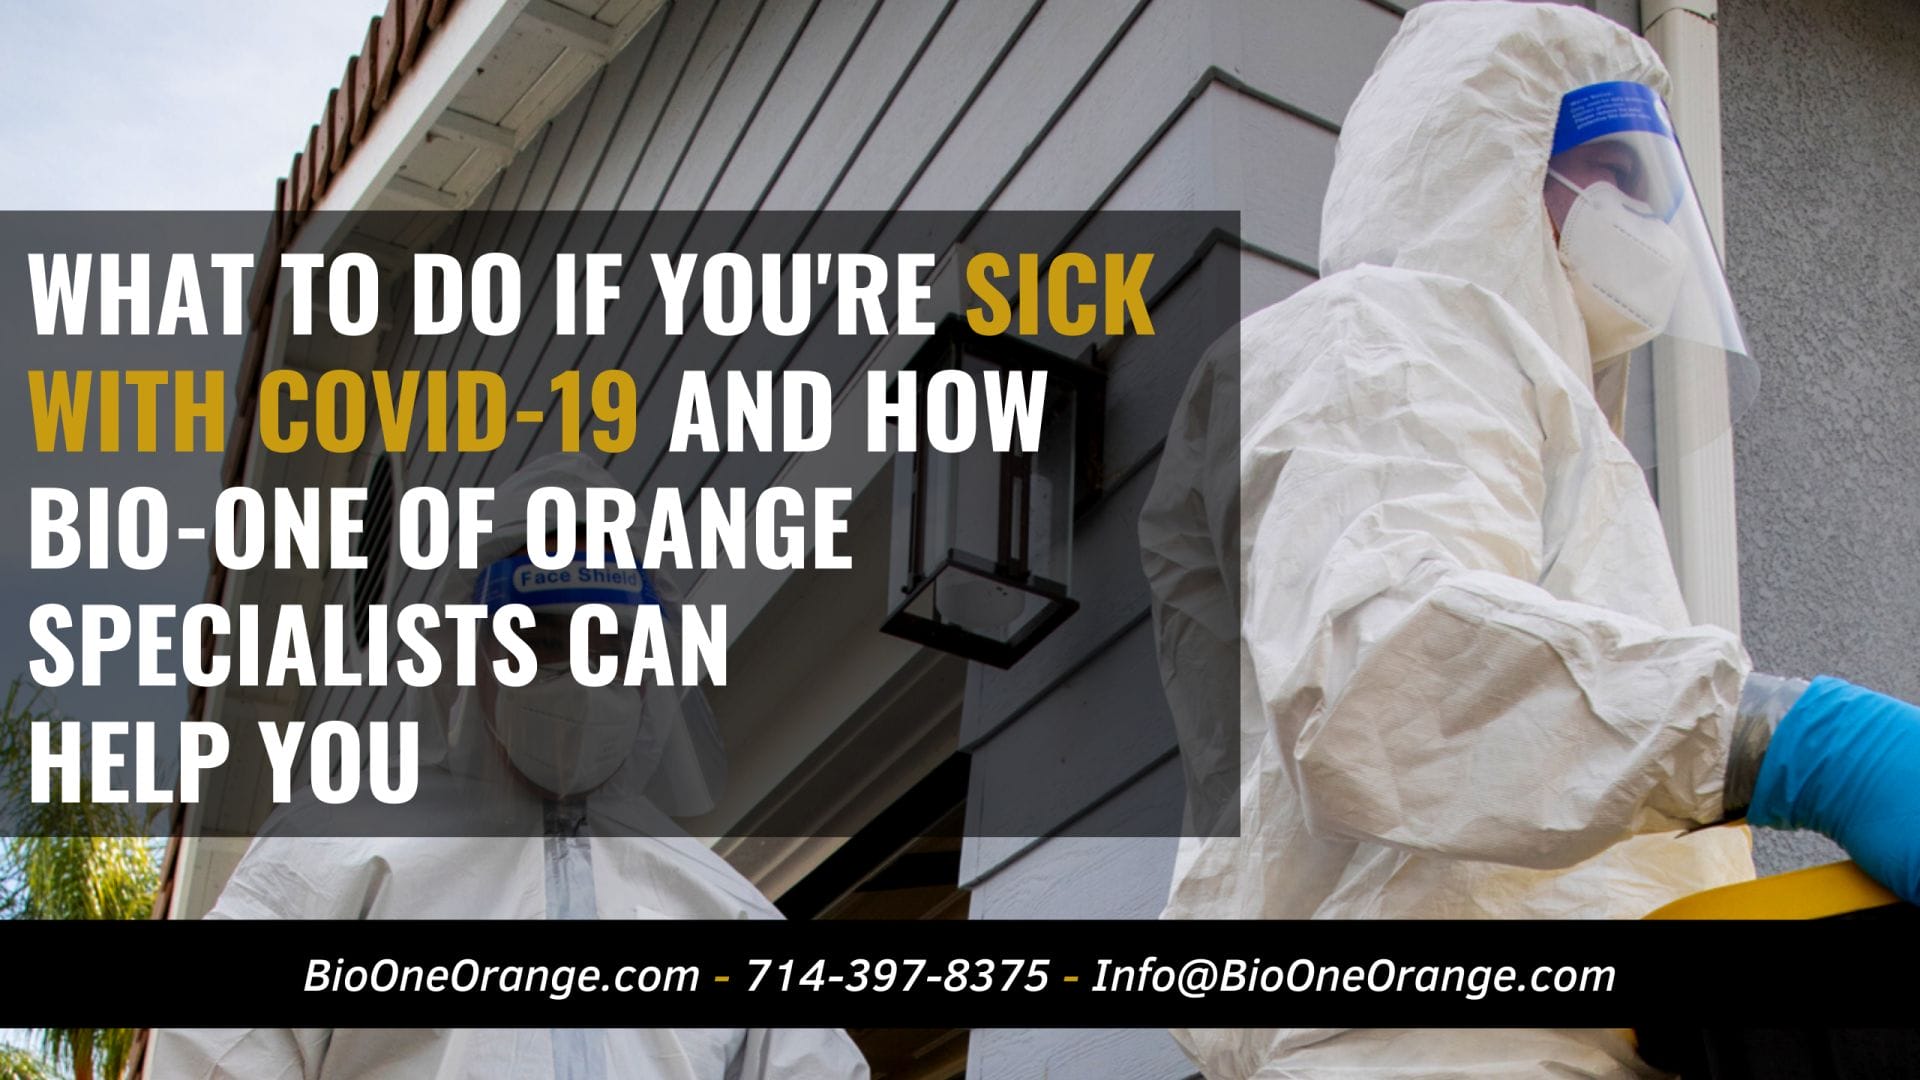 What to do if you’re sick with COVID-19 and how Bio-One of Orange specialists can help you